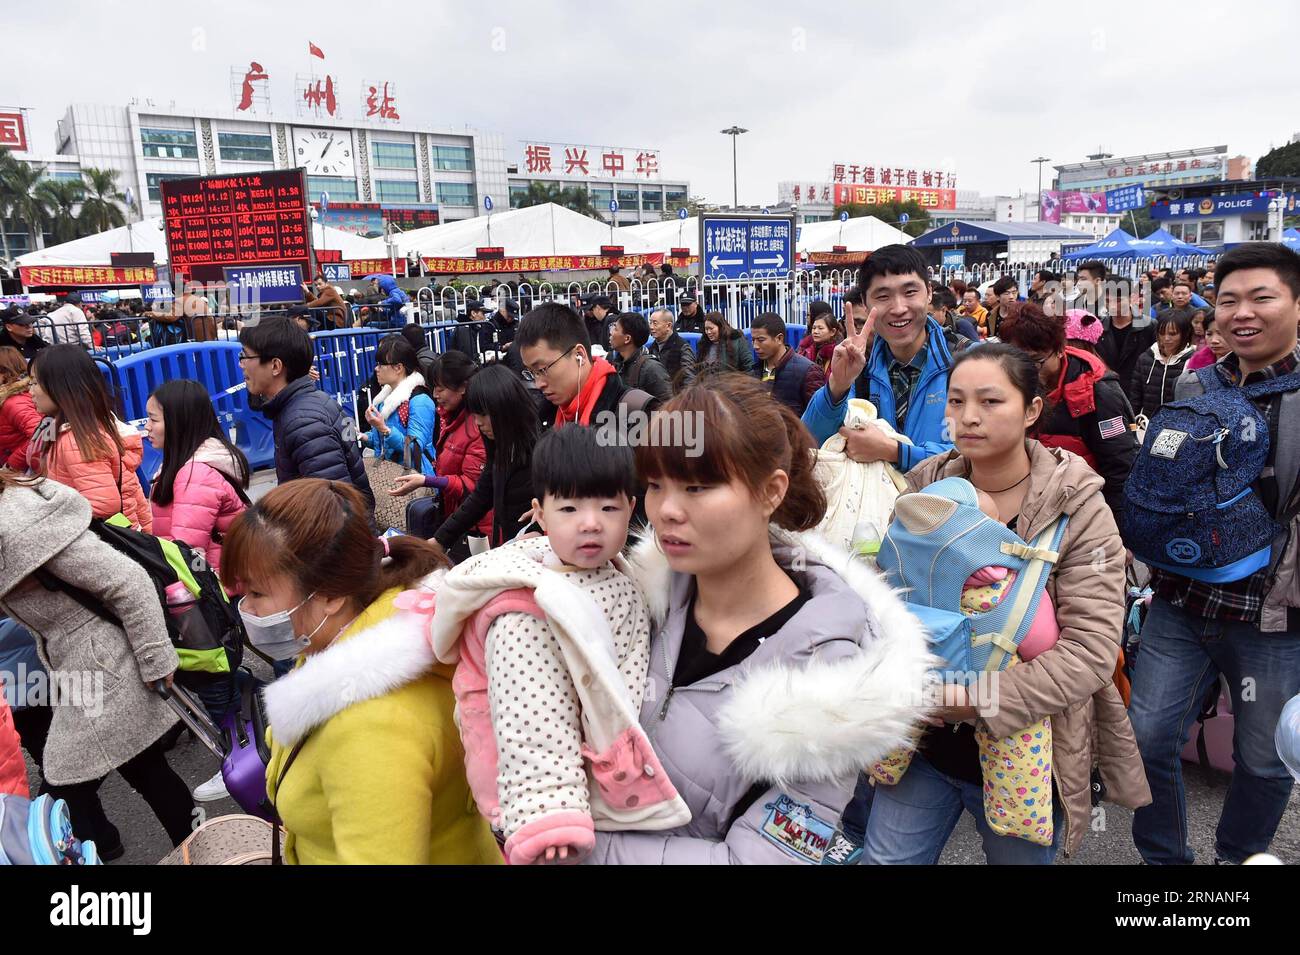 (160202) -- GUANGZHOU, Feb. 2, 2016 -- Passengers rushing home for the coming Spring Festival, or the Chinese Lunar New Year, are seen stranded out of Guangzhou railway station in Guangzhou,south China s Guangdong Province, Feb. 2, 2016. Some 50,000 passengers were detained in the railway station due to delays of trains caused by continous bad weather. ) (cxy) CHINA-GUANGZHOU-RAILWAY-PASSENGER-DELAY (CN) LiangxXu PUBLICATIONxNOTxINxCHN   Guangzhou Feb 2 2016 Passengers Rushing Home for The Coming Spring Festival or The Chinese Lunar New Year are Lakes stranded out of Guangzhou Railway Station Stock Photo